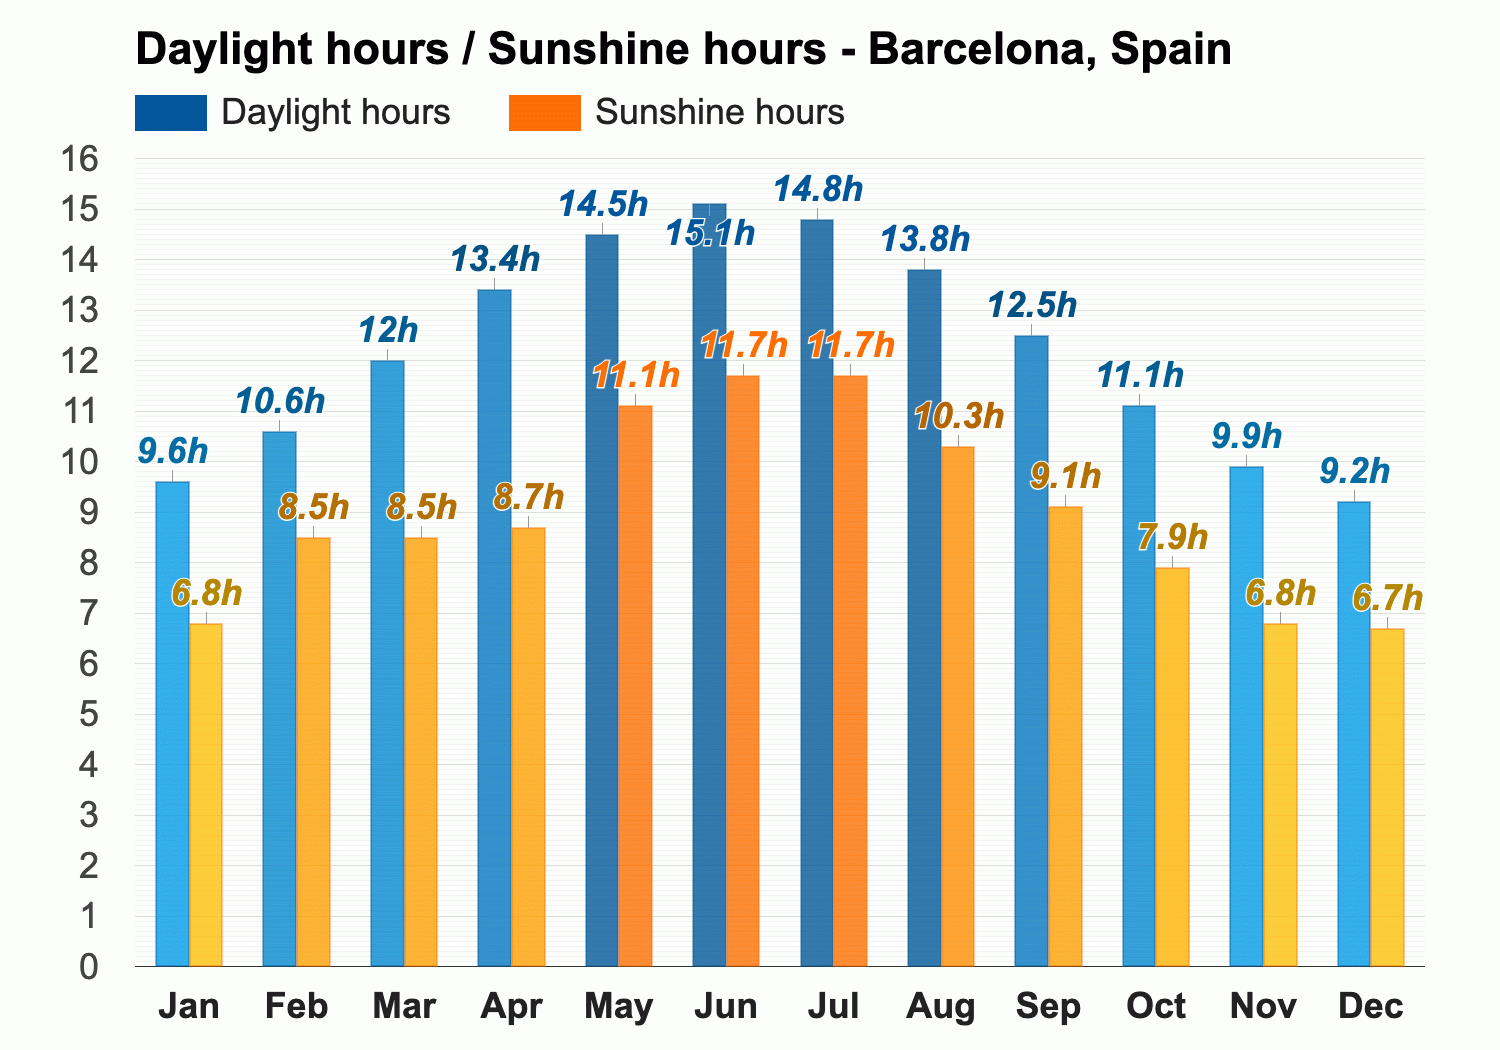 Barcelona, Spain - Climate & Monthly weather forecast